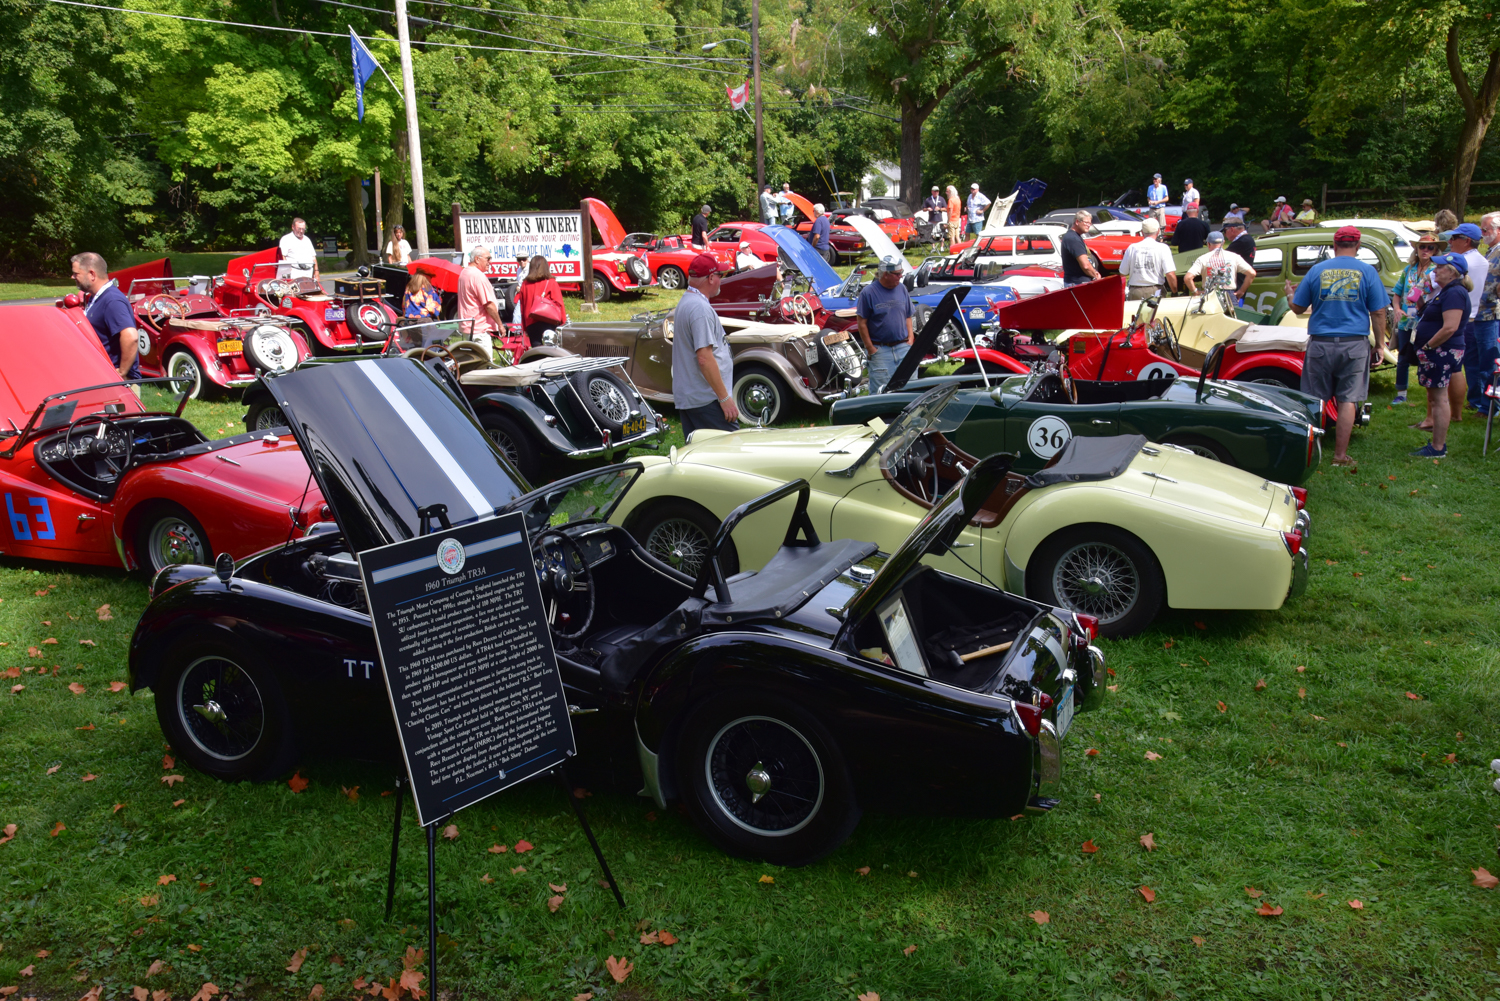 Many gorgeous Triumphs and MGs graced the car show at Heineman’s Winery. DANIEL MAINZER